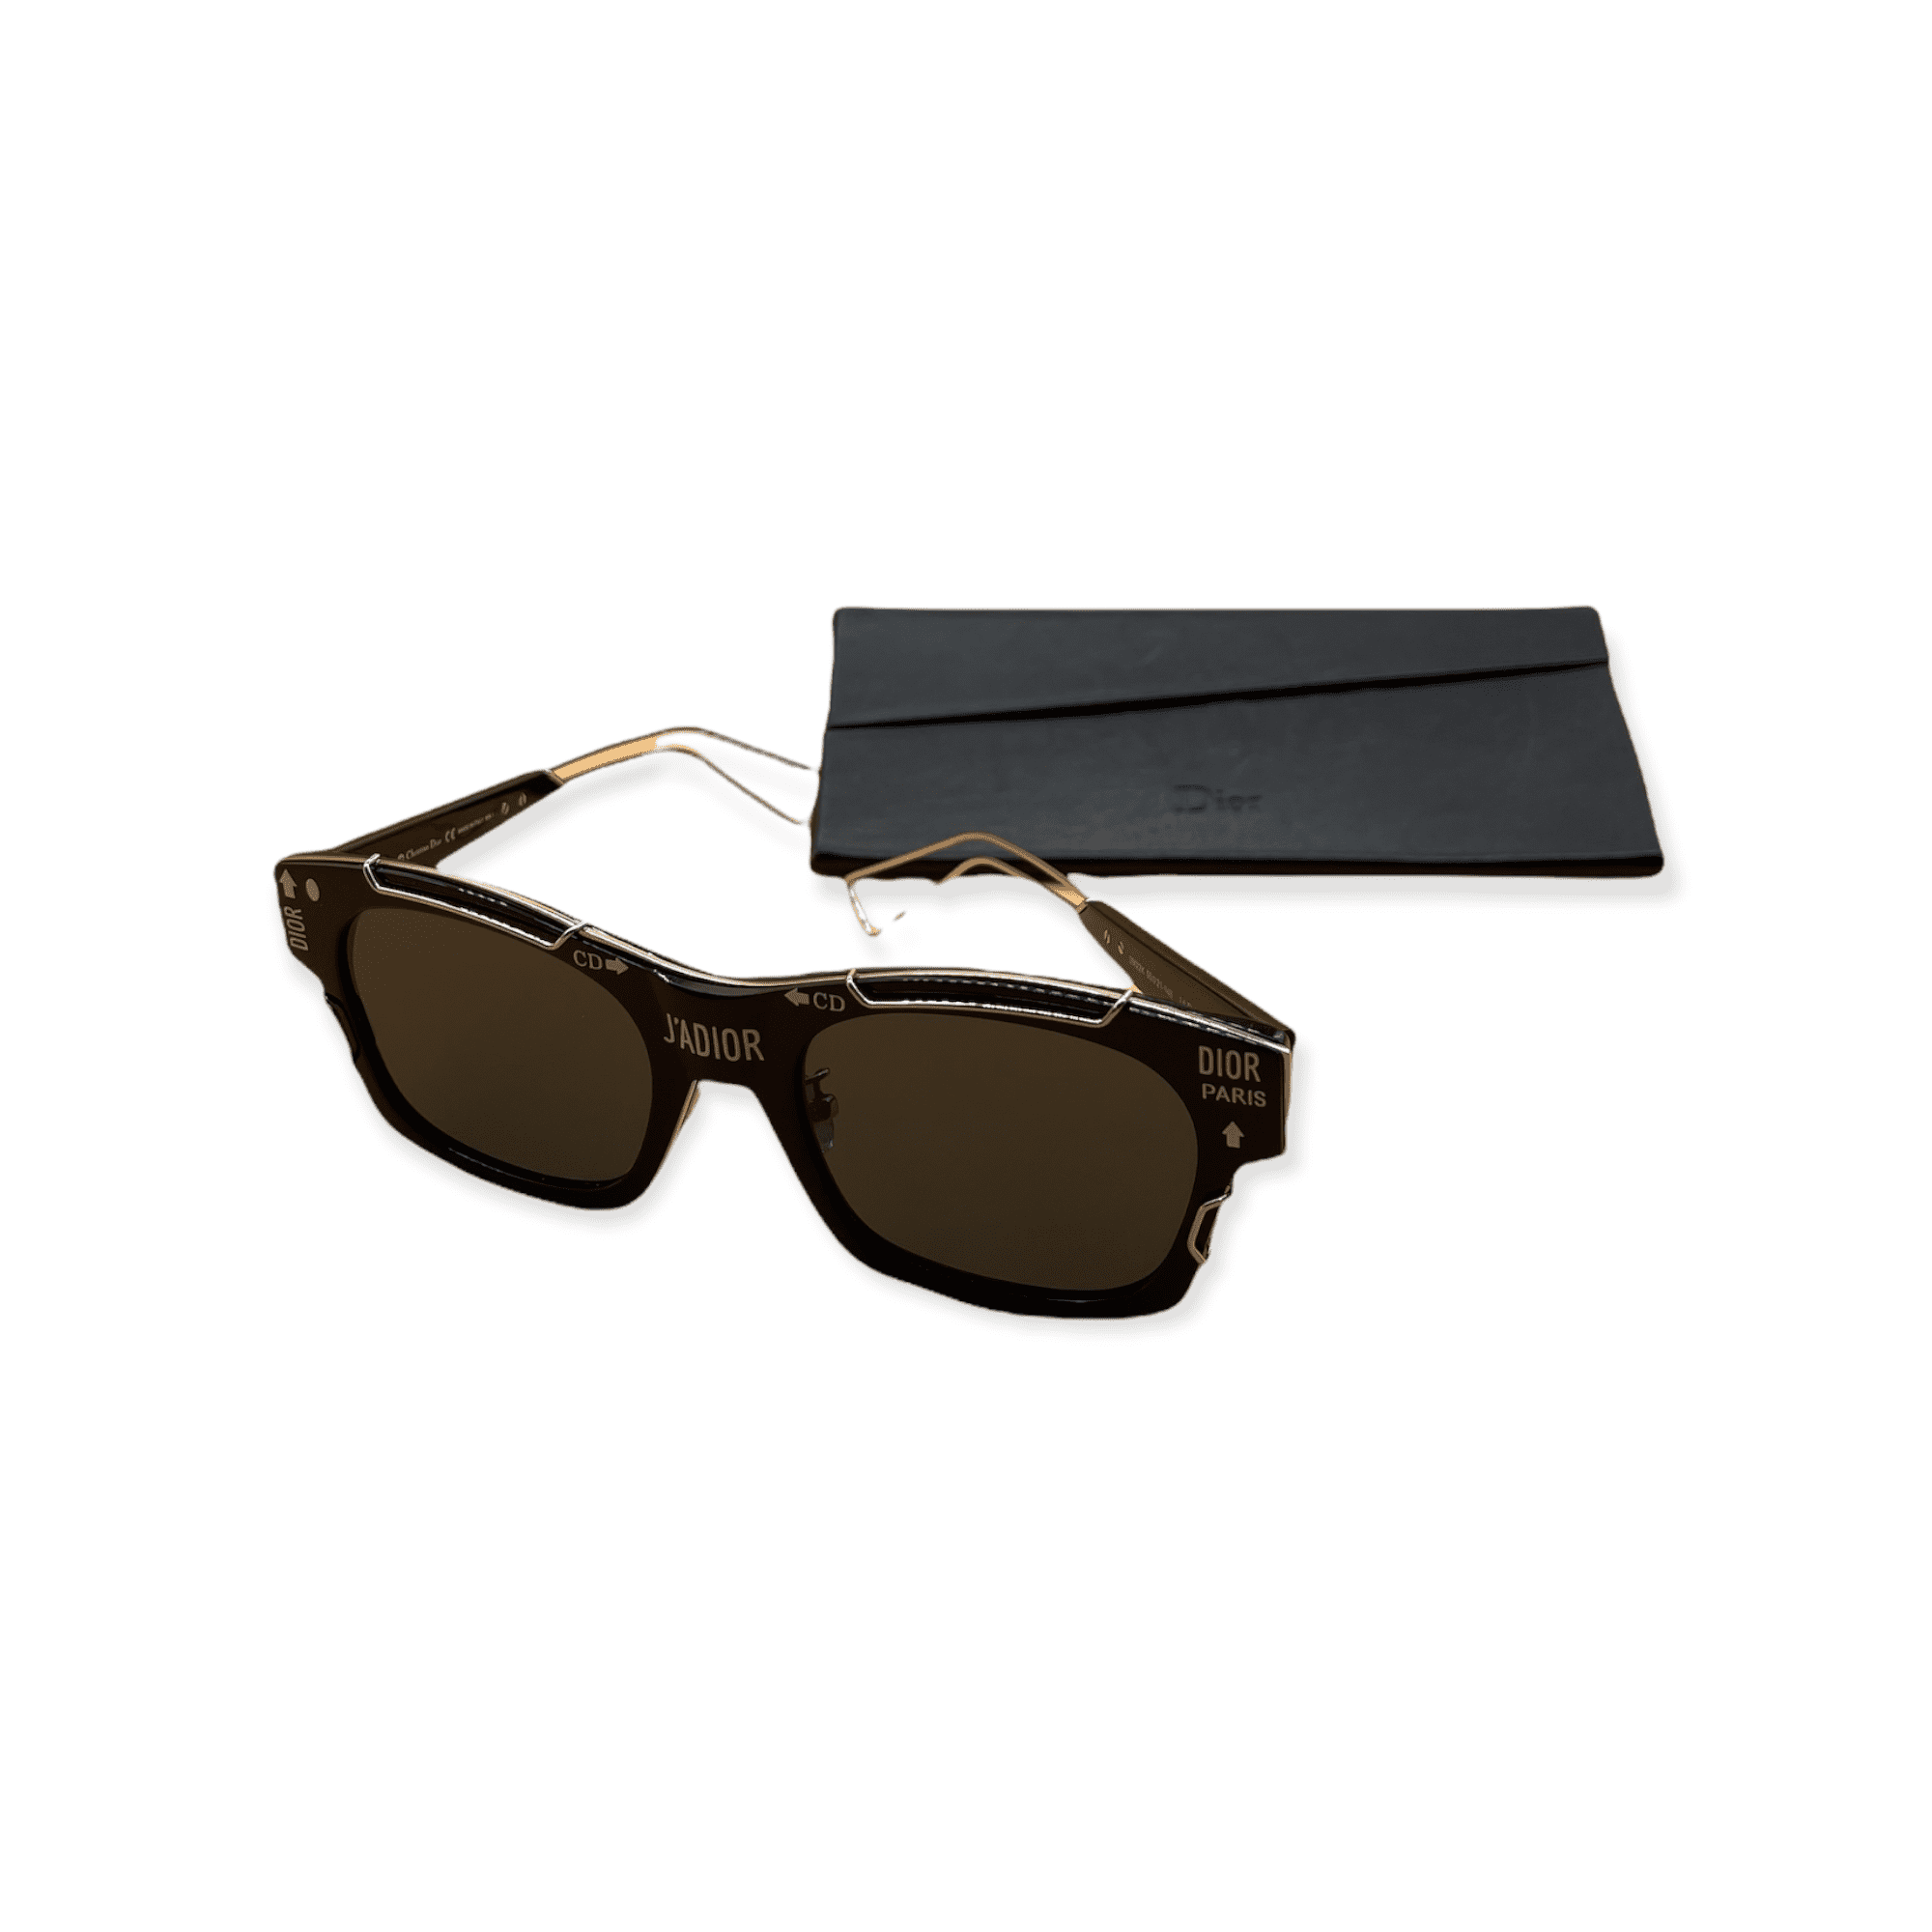 Dior Club2 Sunglasses Review and Style